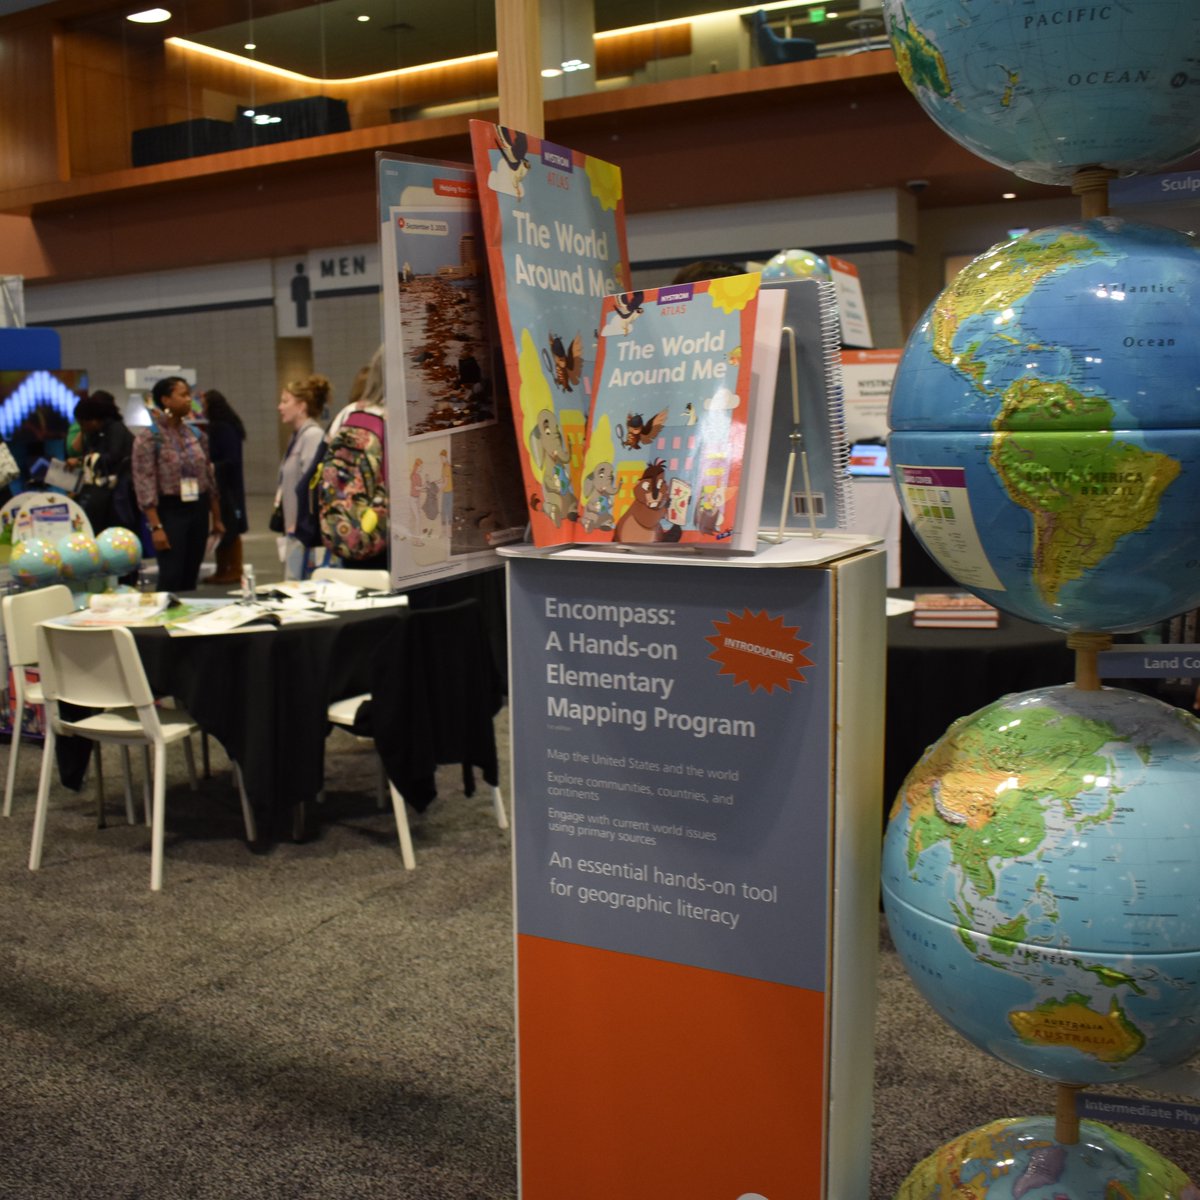 What a great week of learning & networking! 🌍📚 Thx to @NCSSNetwork for choosing us for your annual conference. Safe travels home to all attendees & exhibitors. ✈️🚗 #NCSS2023